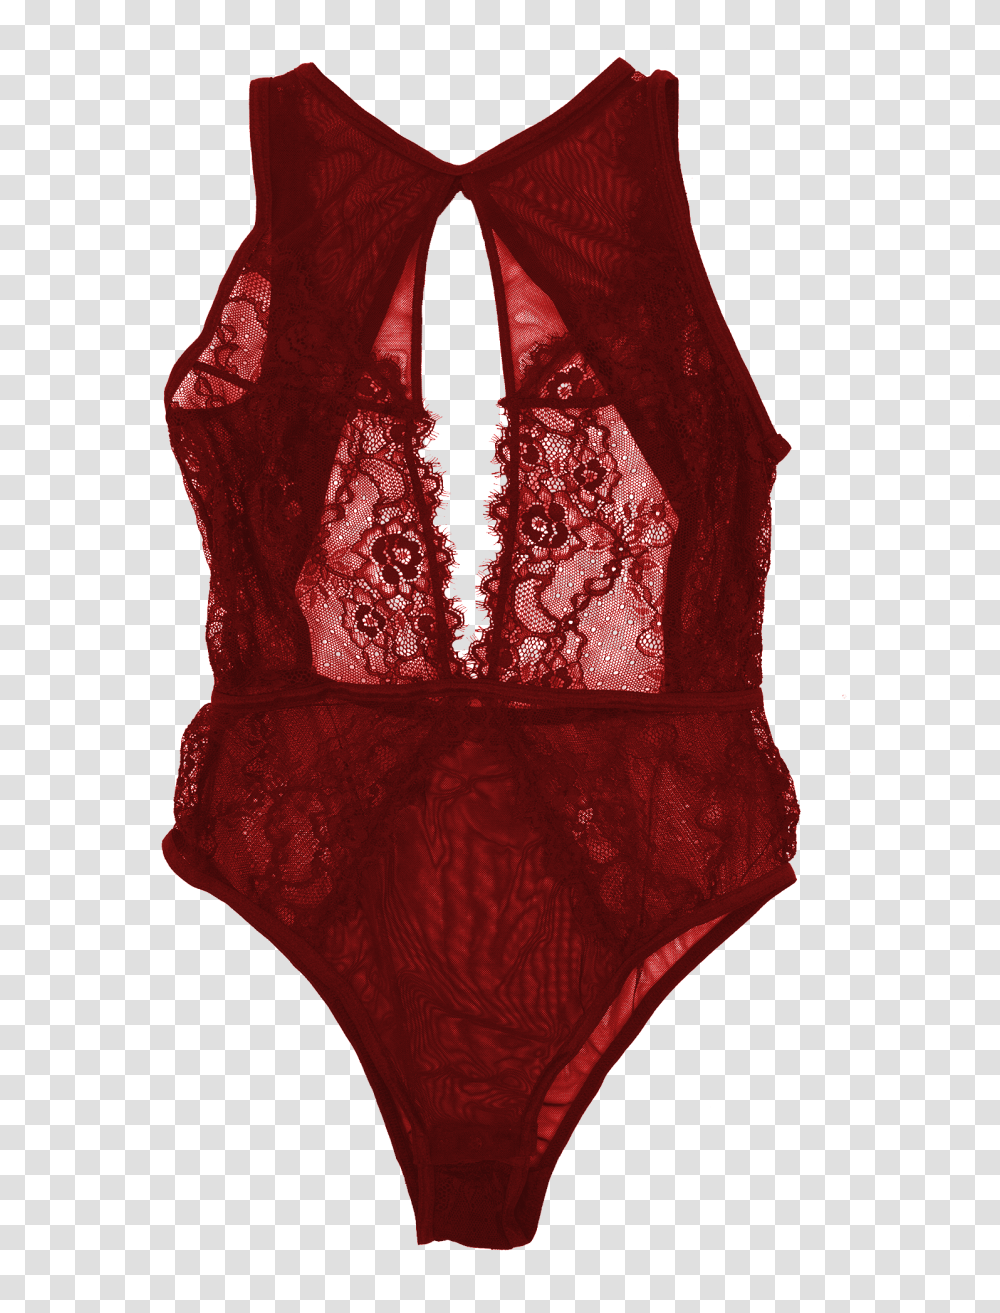 Lace And Mesh Keyhole Body Suit Red Sneaky Vaunt, Apparel, Lingerie, Underwear Transparent Png